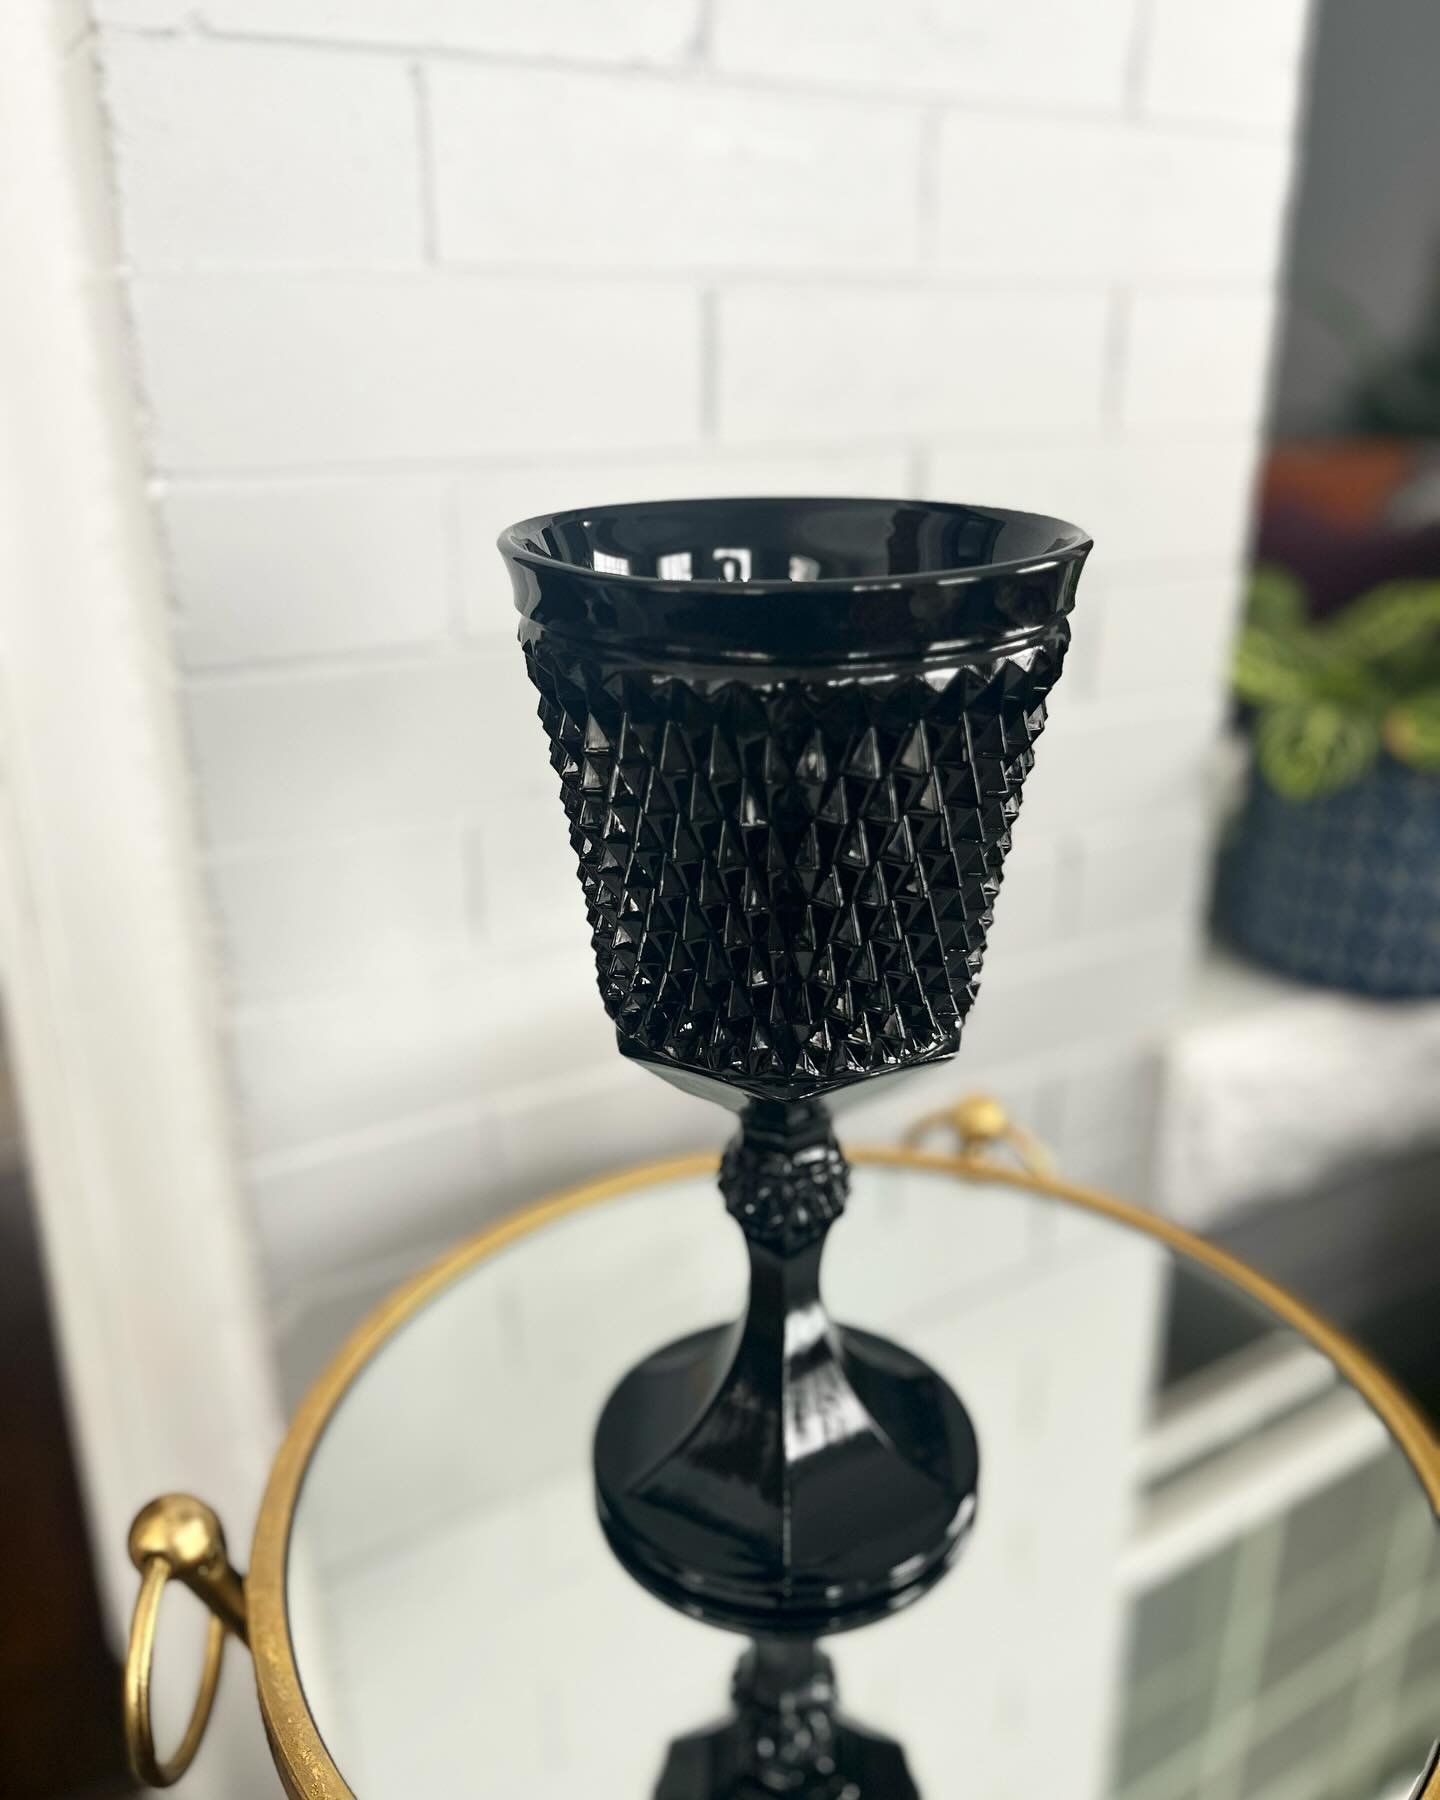 This Black Indiana Glass Tiara Diamond Point Apothecary Candy Jar Vase is one my favorite finds from the weekend! 

Available for $95. DM to purchase! 

#indianaglass #thrifted #vintageglasscollection #vintageglassforsale